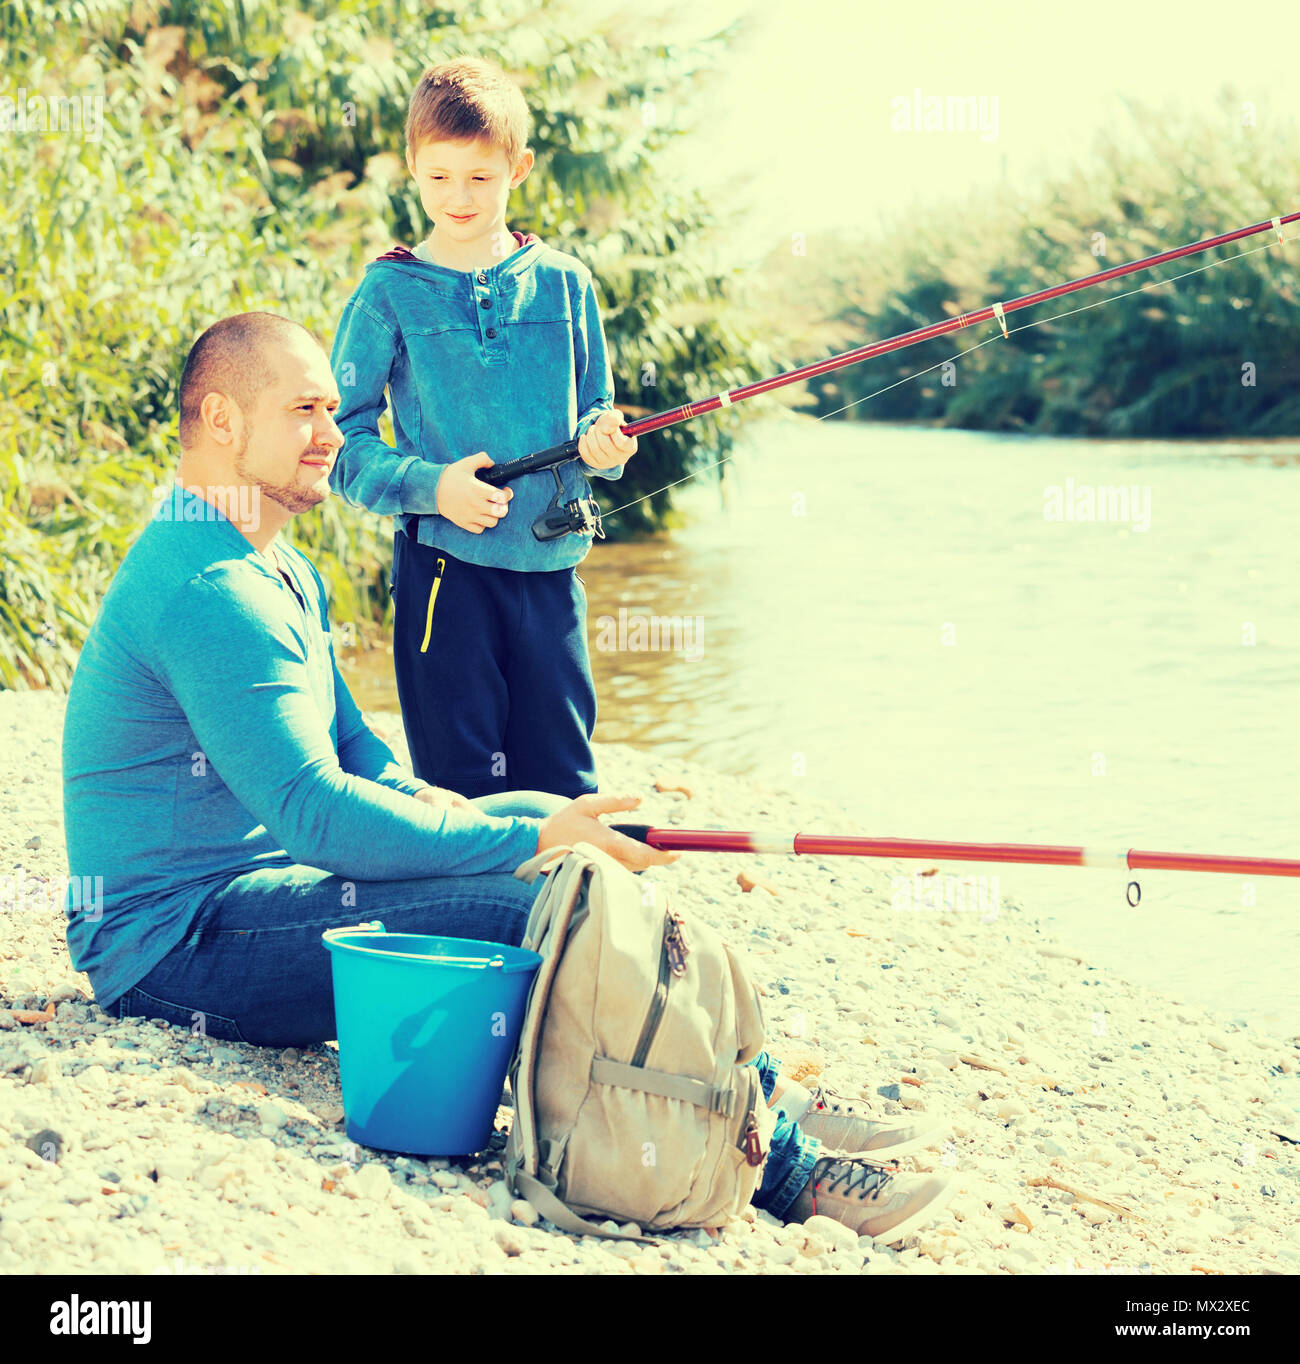 https://c8.alamy.com/comp/MX2XEC/young-father-and-son-fishing-with-rods-in-summer-day-MX2XEC.jpg